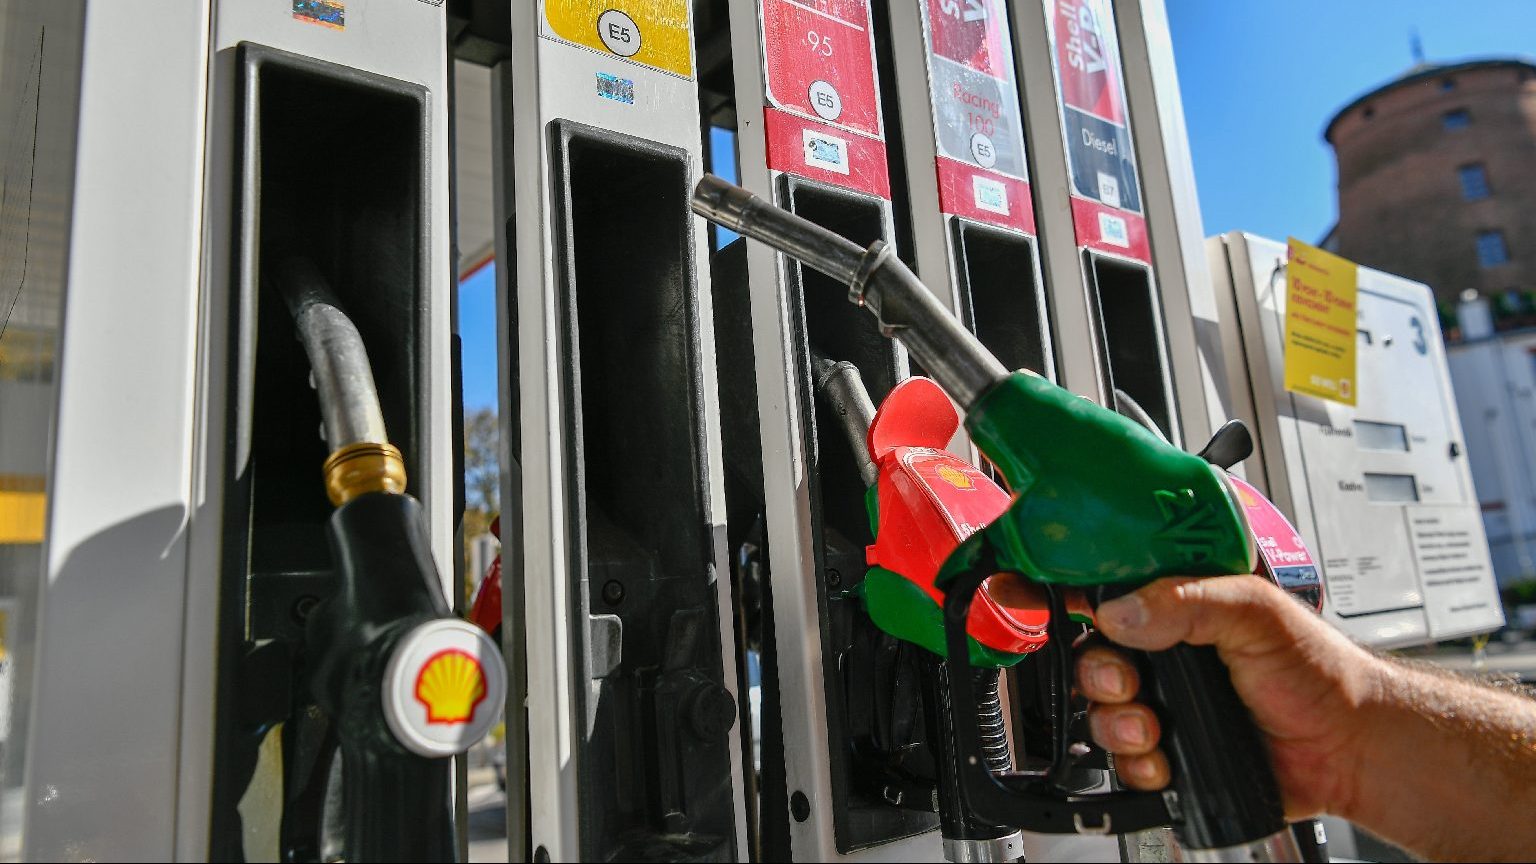 Fuel Price Cap: Motorists Saved 22 Billion Forints, State Gained Several Hundred Million, Gas Stations Lost Billions